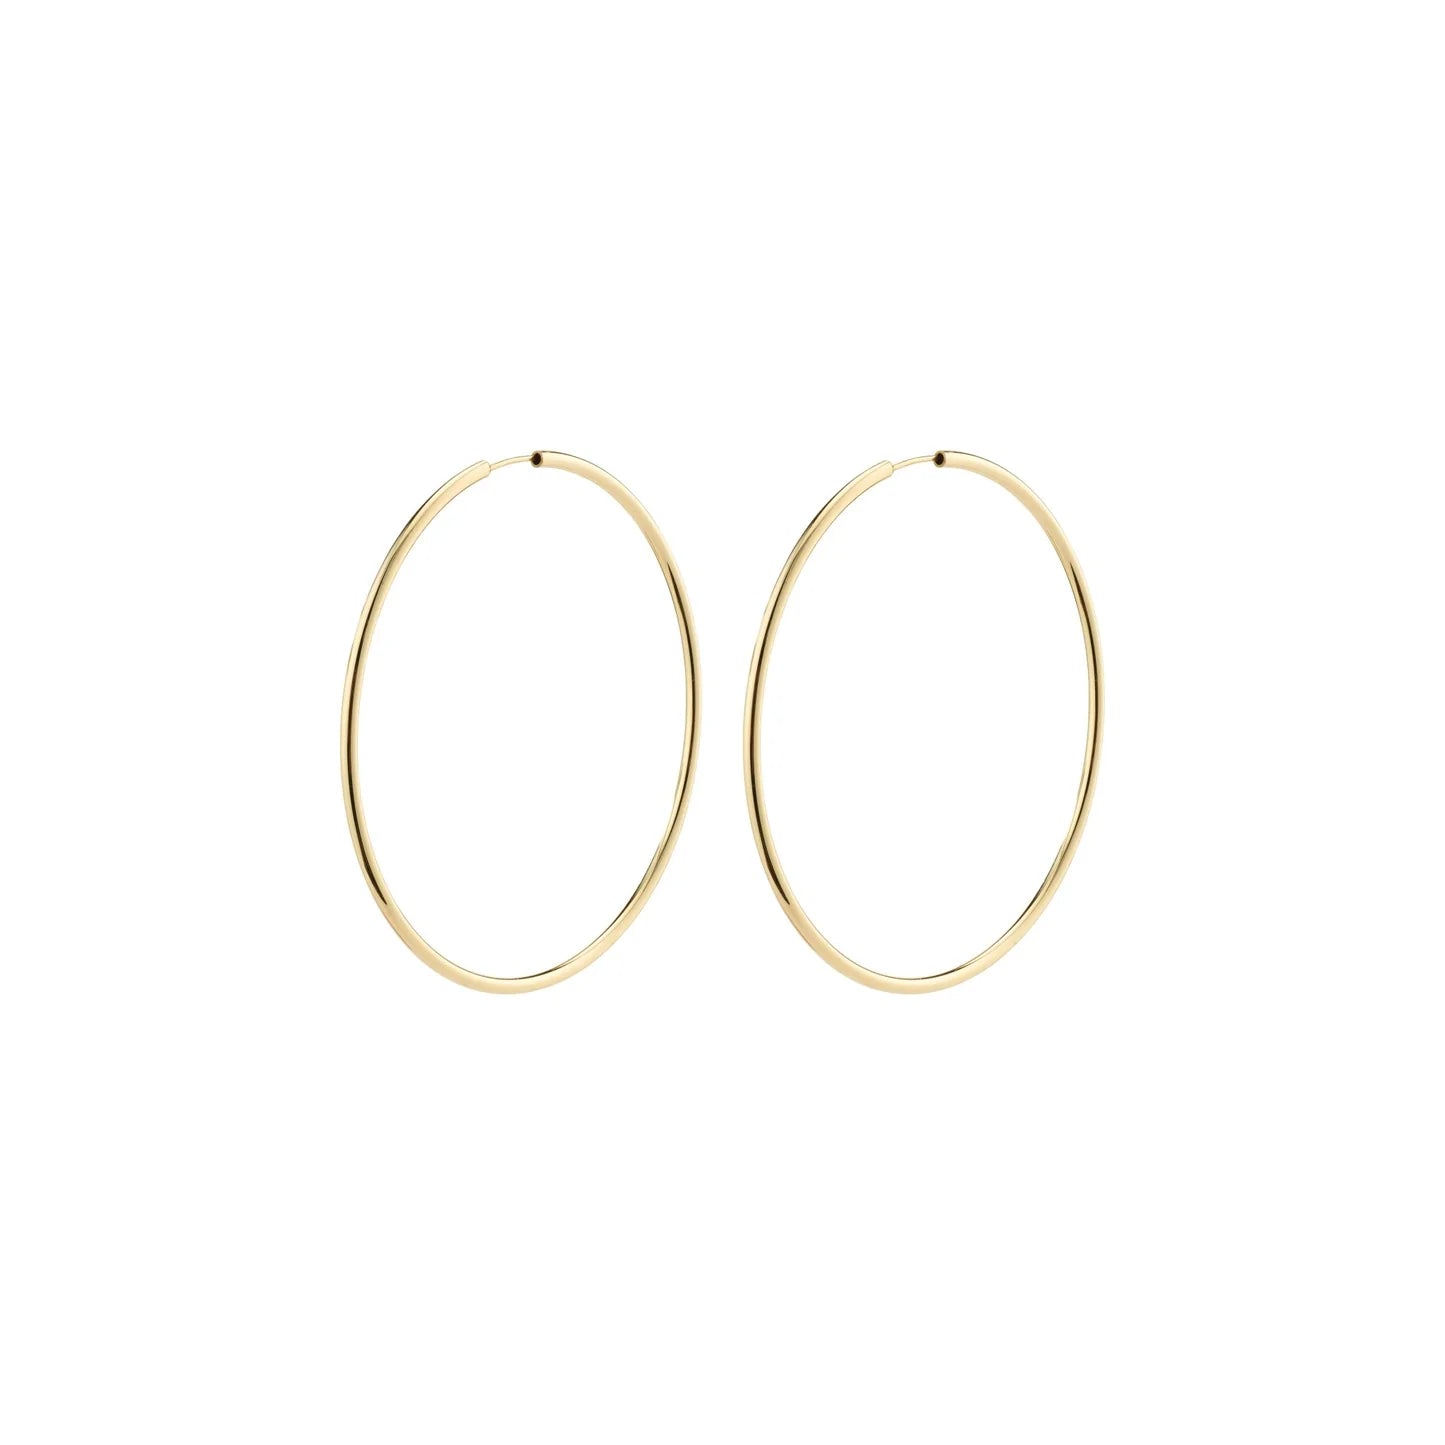 APRIL RECYCLED LARGE HOOP EARRINGS / 60MM / GOLD